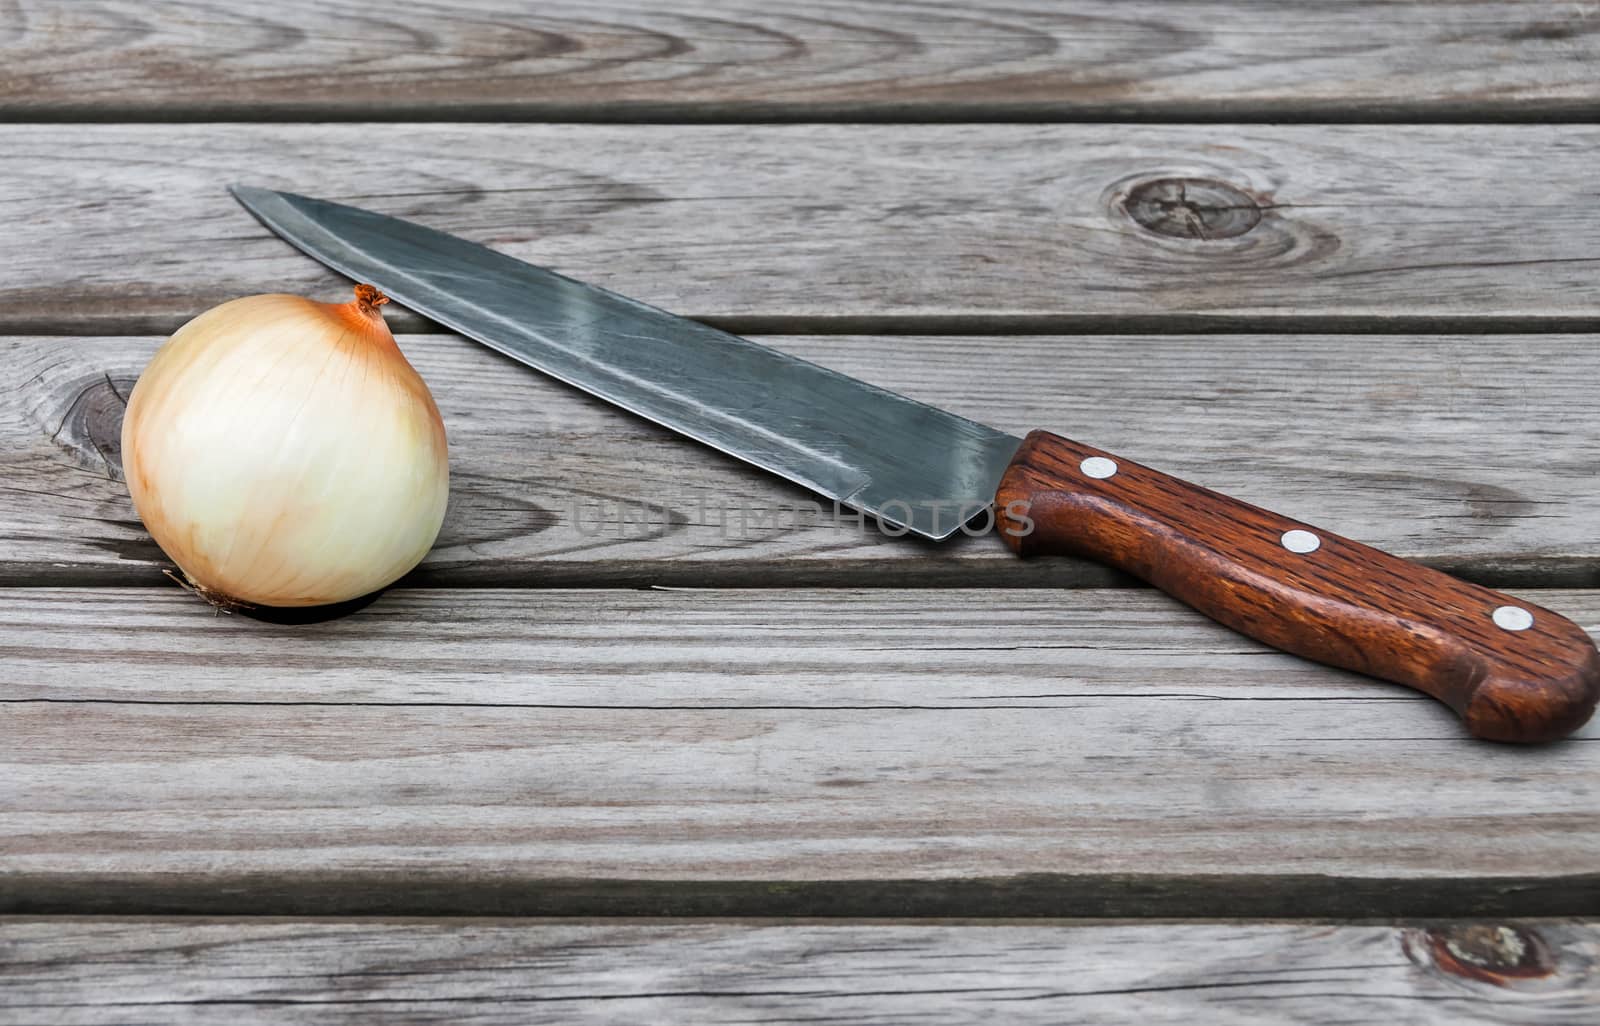 Knife,onion  on a table made of wooden planks